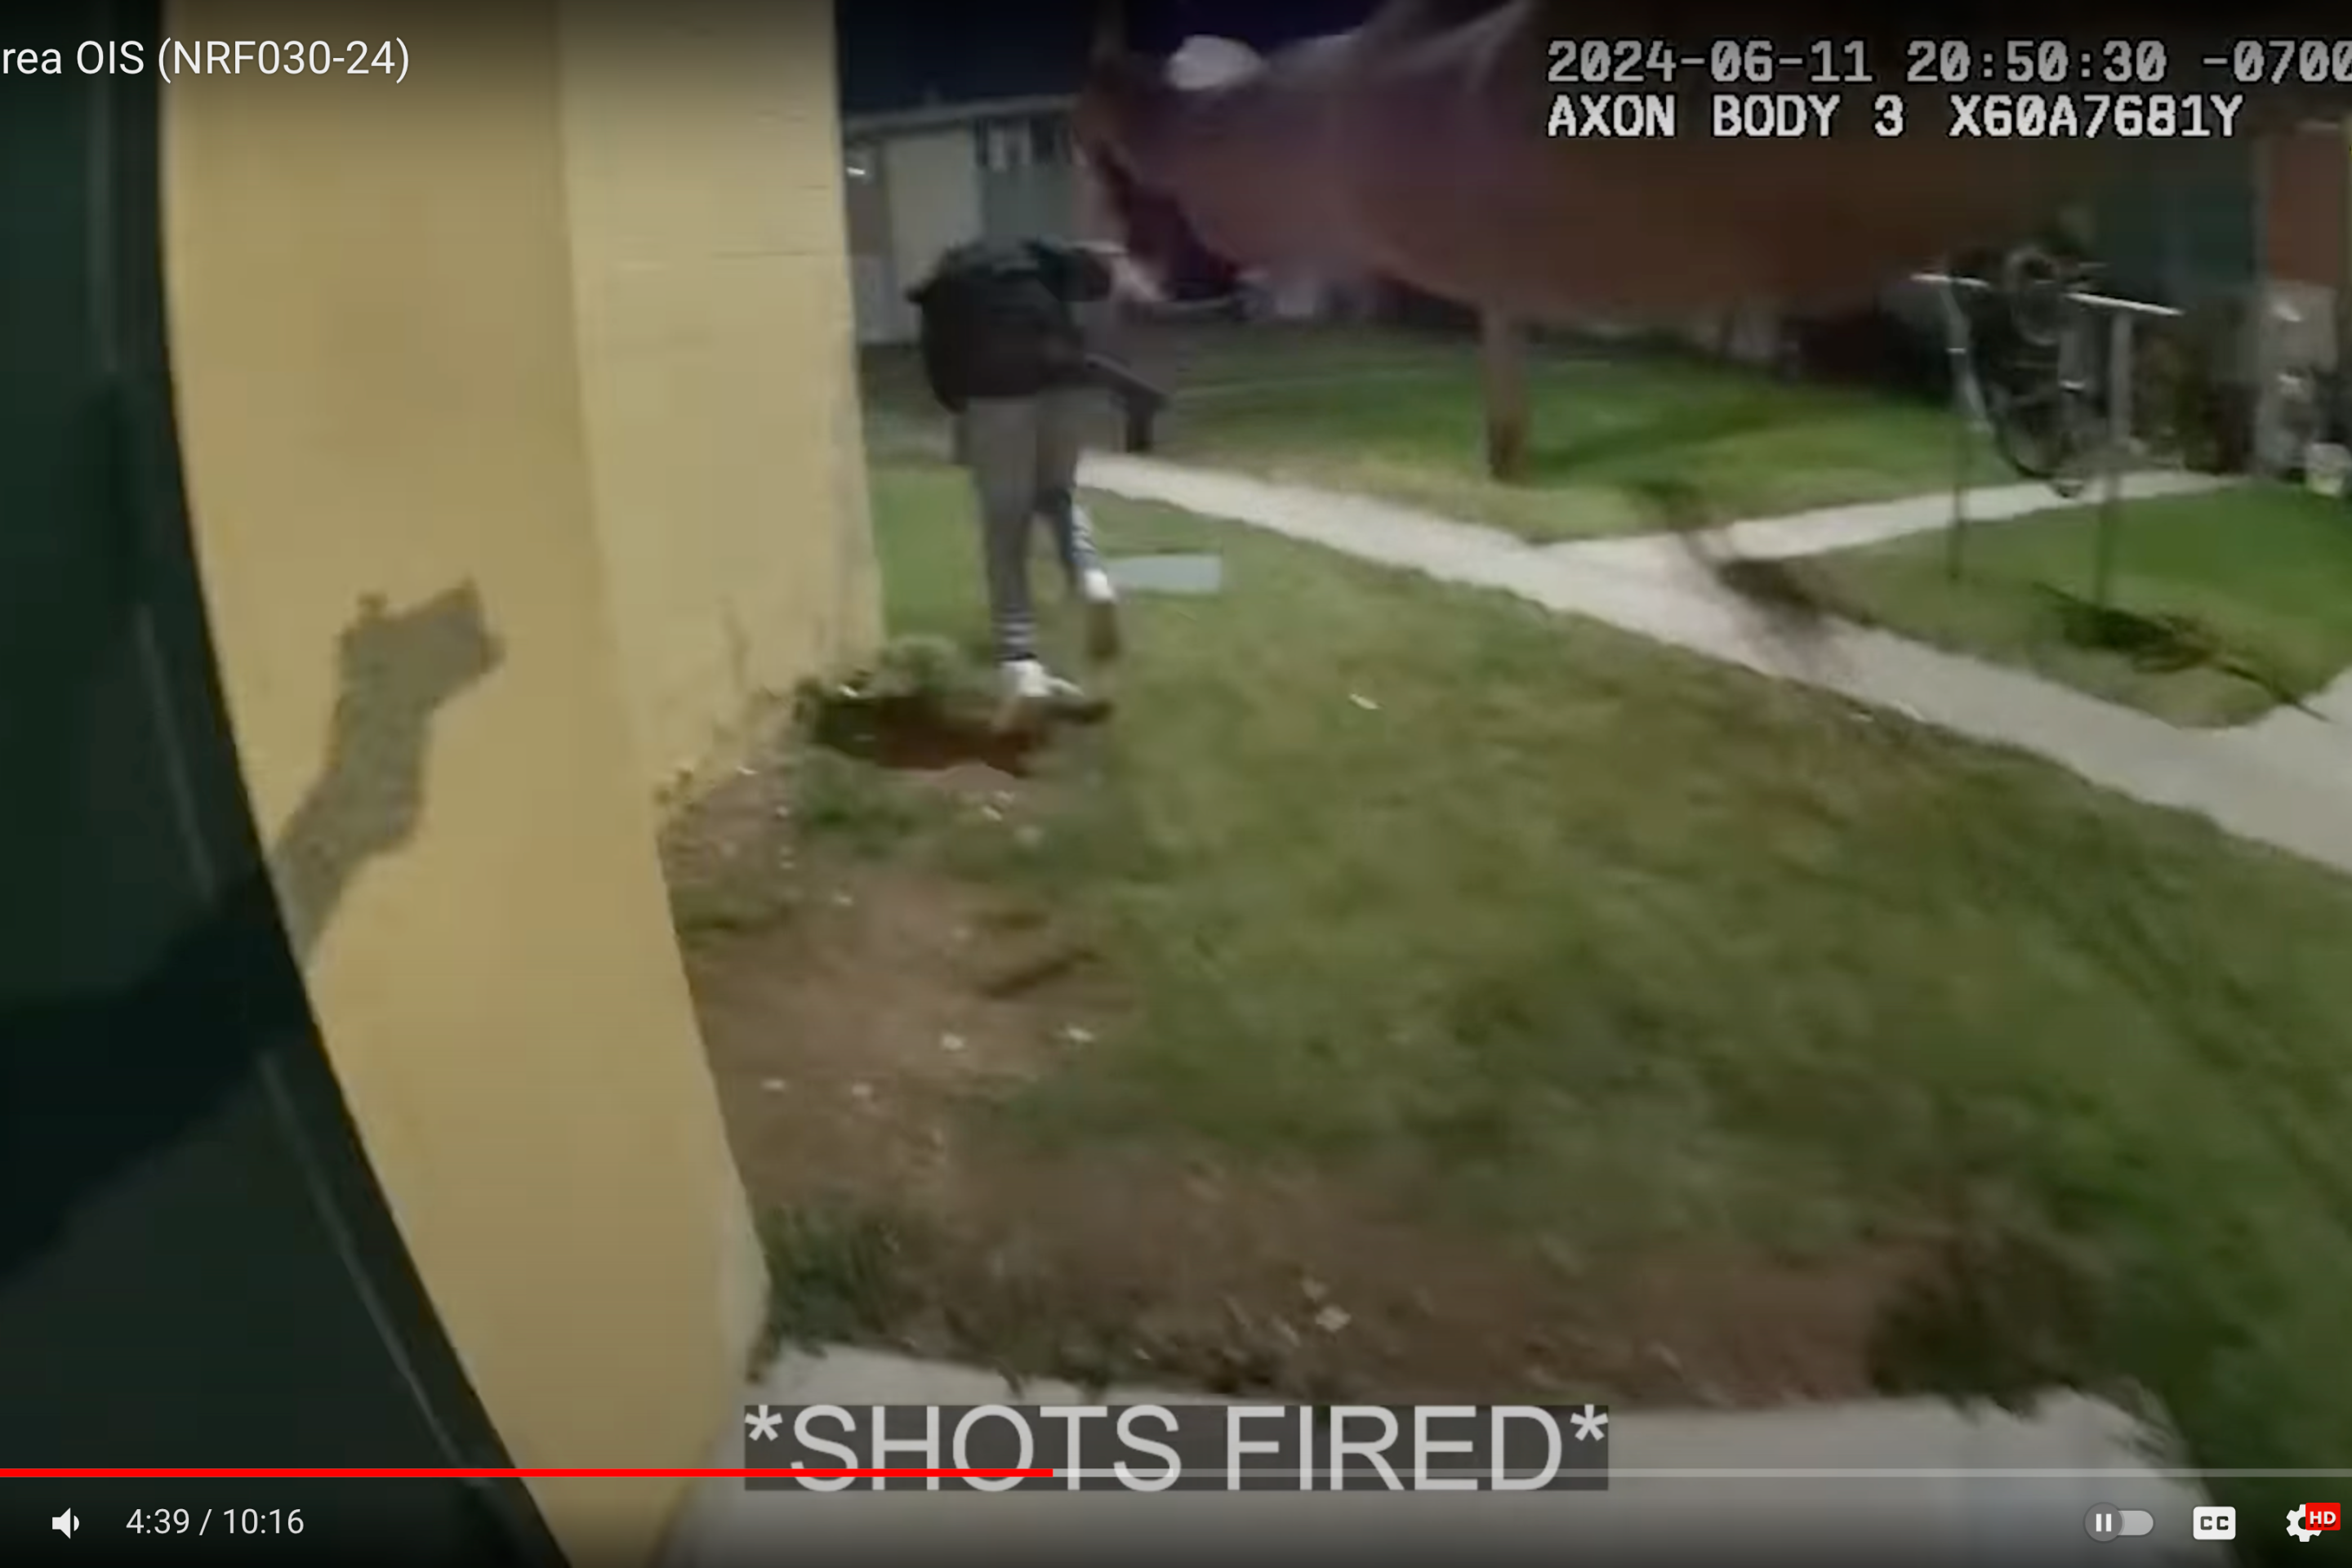 Body camera footage shows officer Daniel Ramirez holding up his gun and shooting Alexander Aguilar-Larios in the back on June 14, 2024, as Aguilar-Larios falls to the ground.